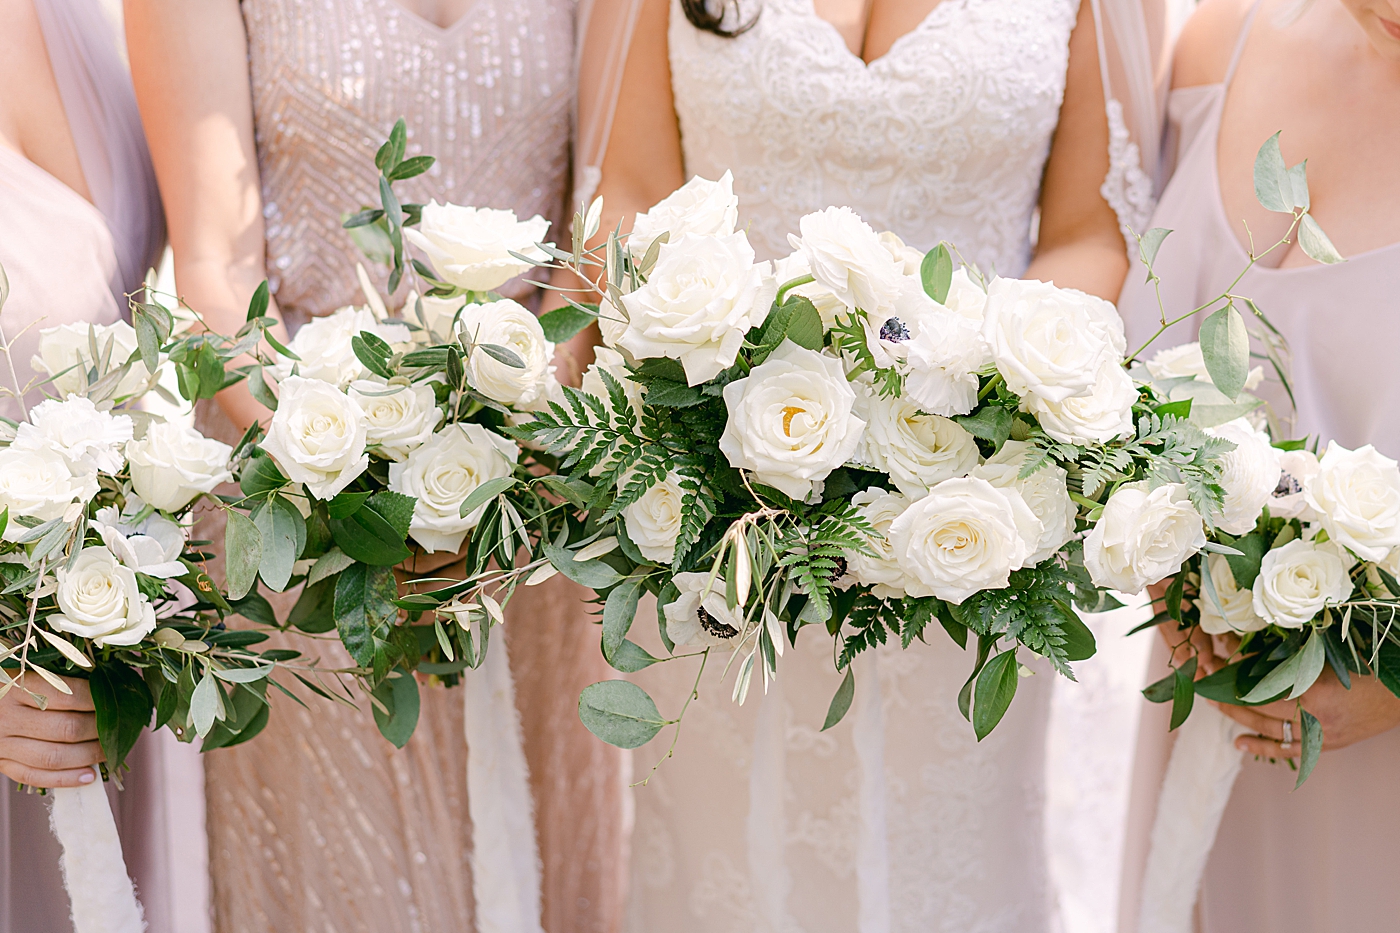 Bouquets in a line held by bridesmaids | Photo by Hope Helmuth Photography